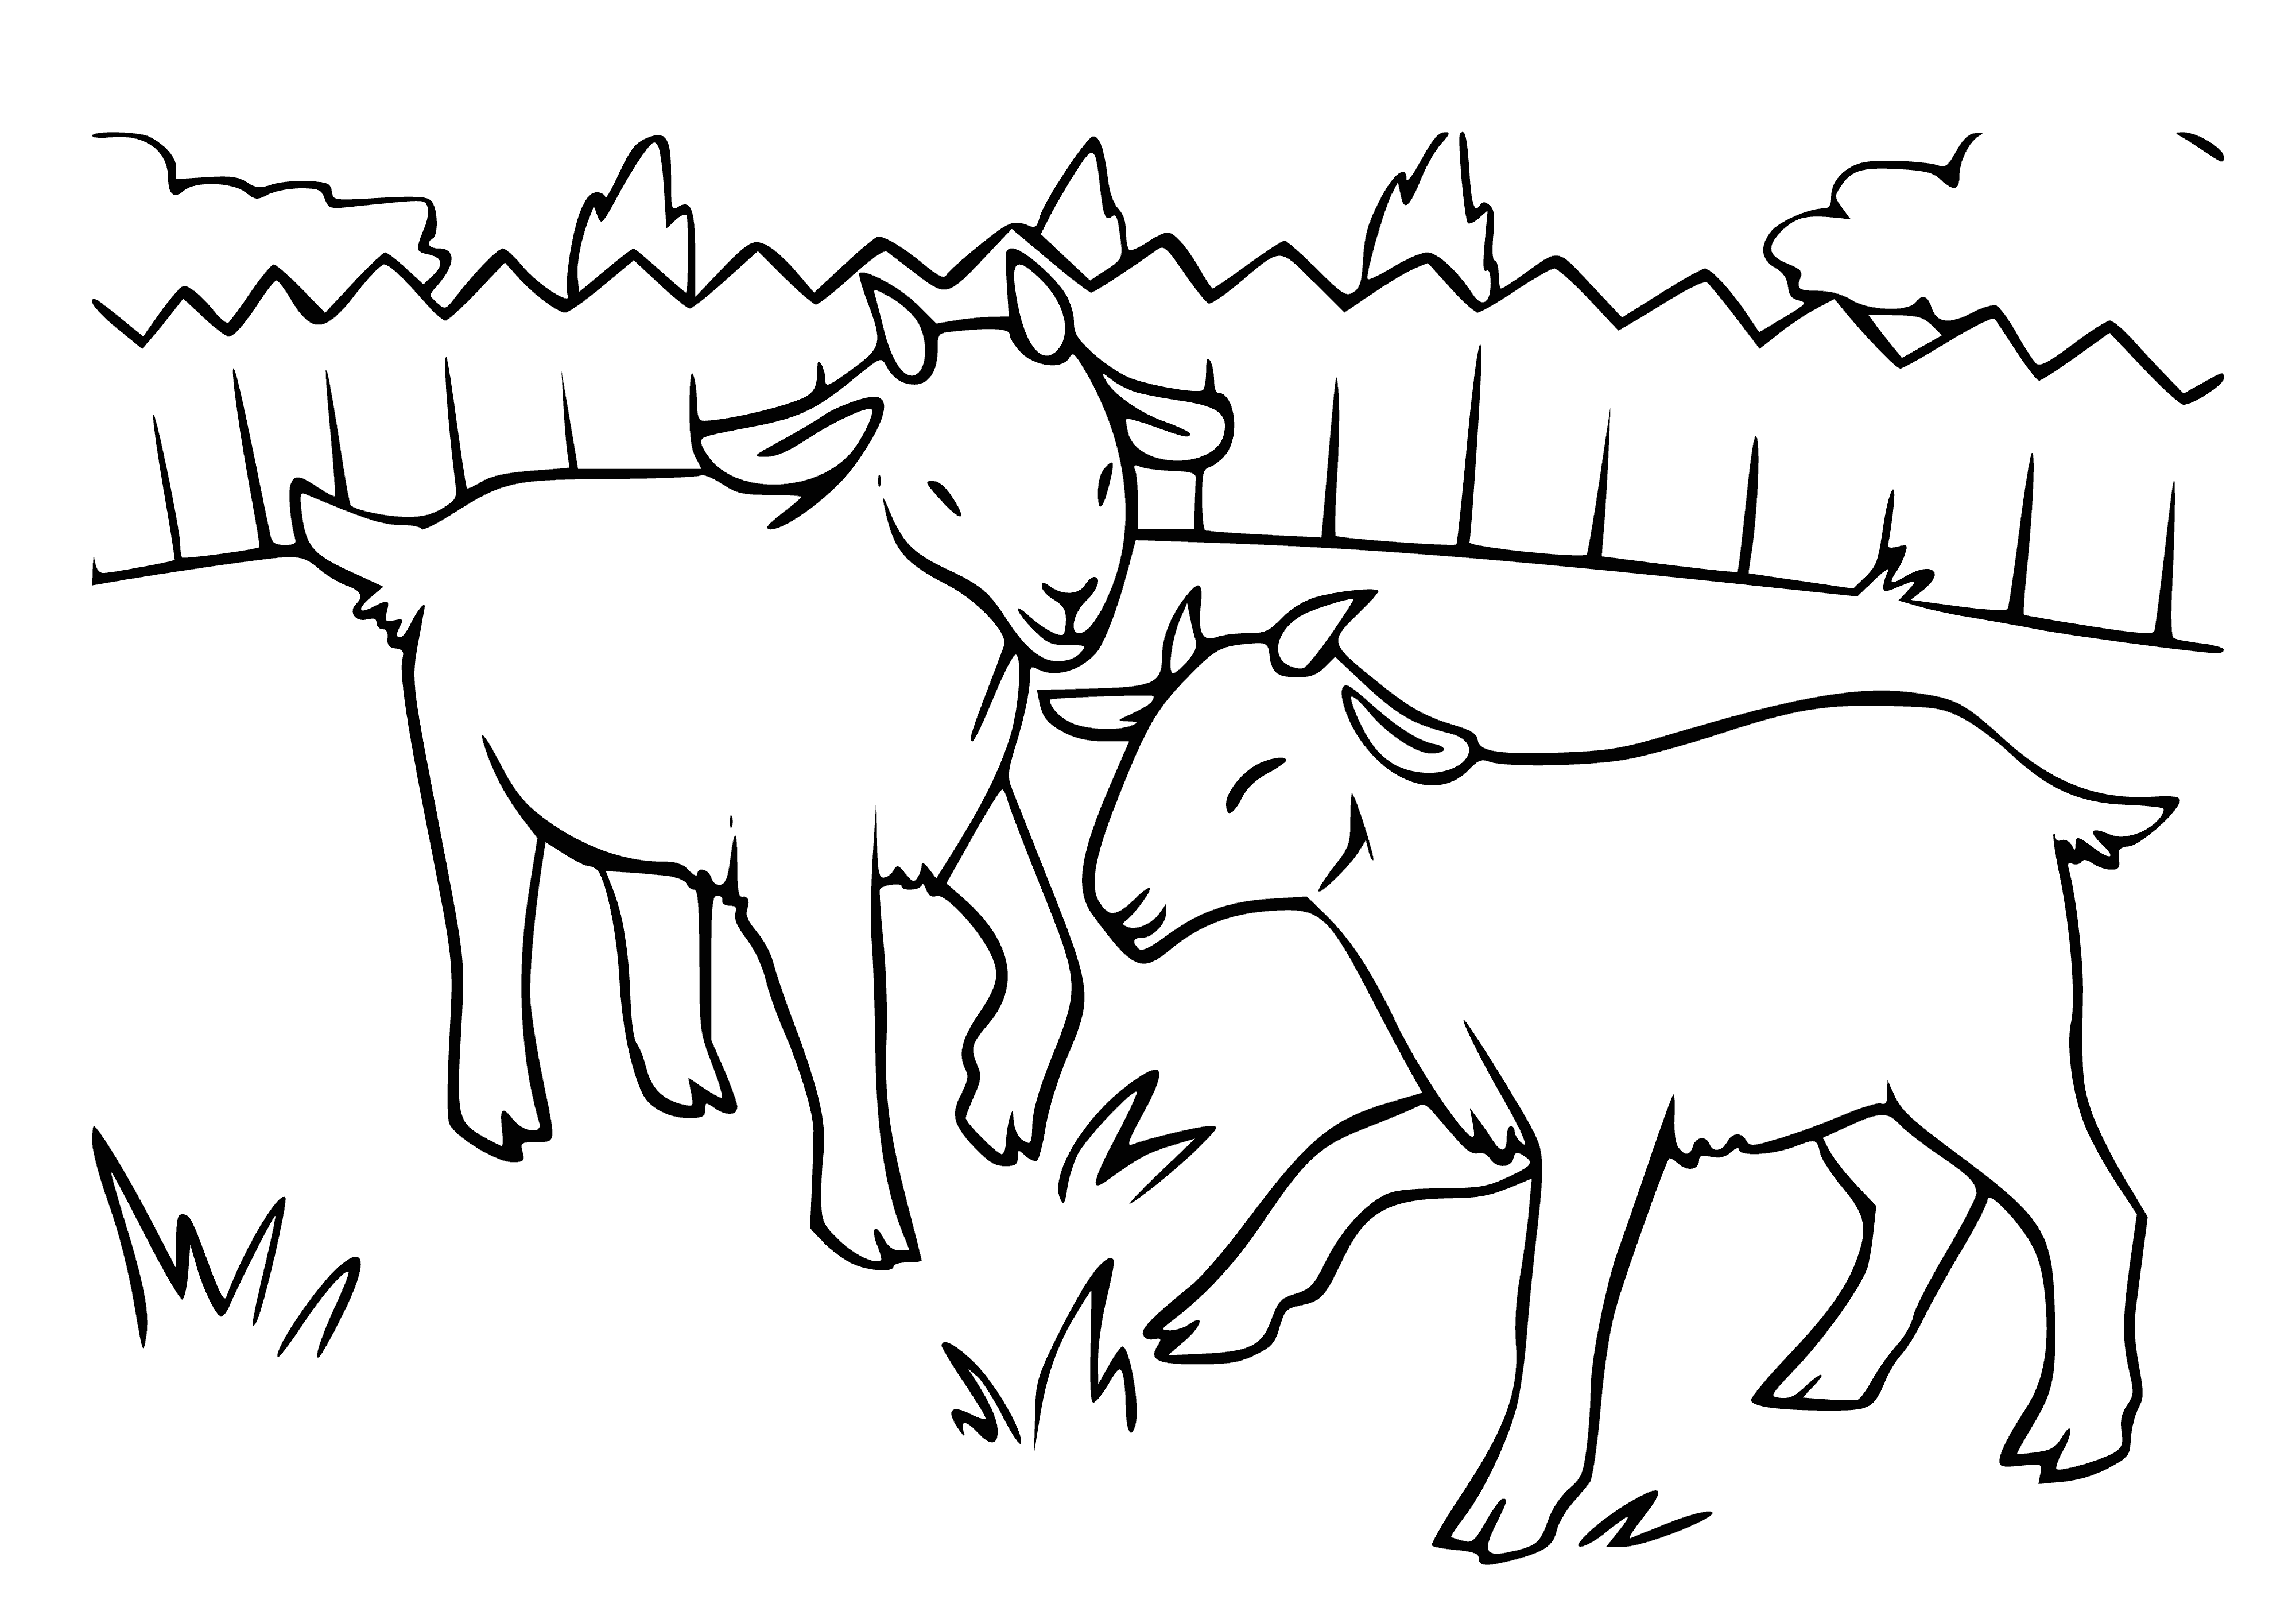 coloring page: Goats with white and black spots grazing on the lawn, munching on some grass.